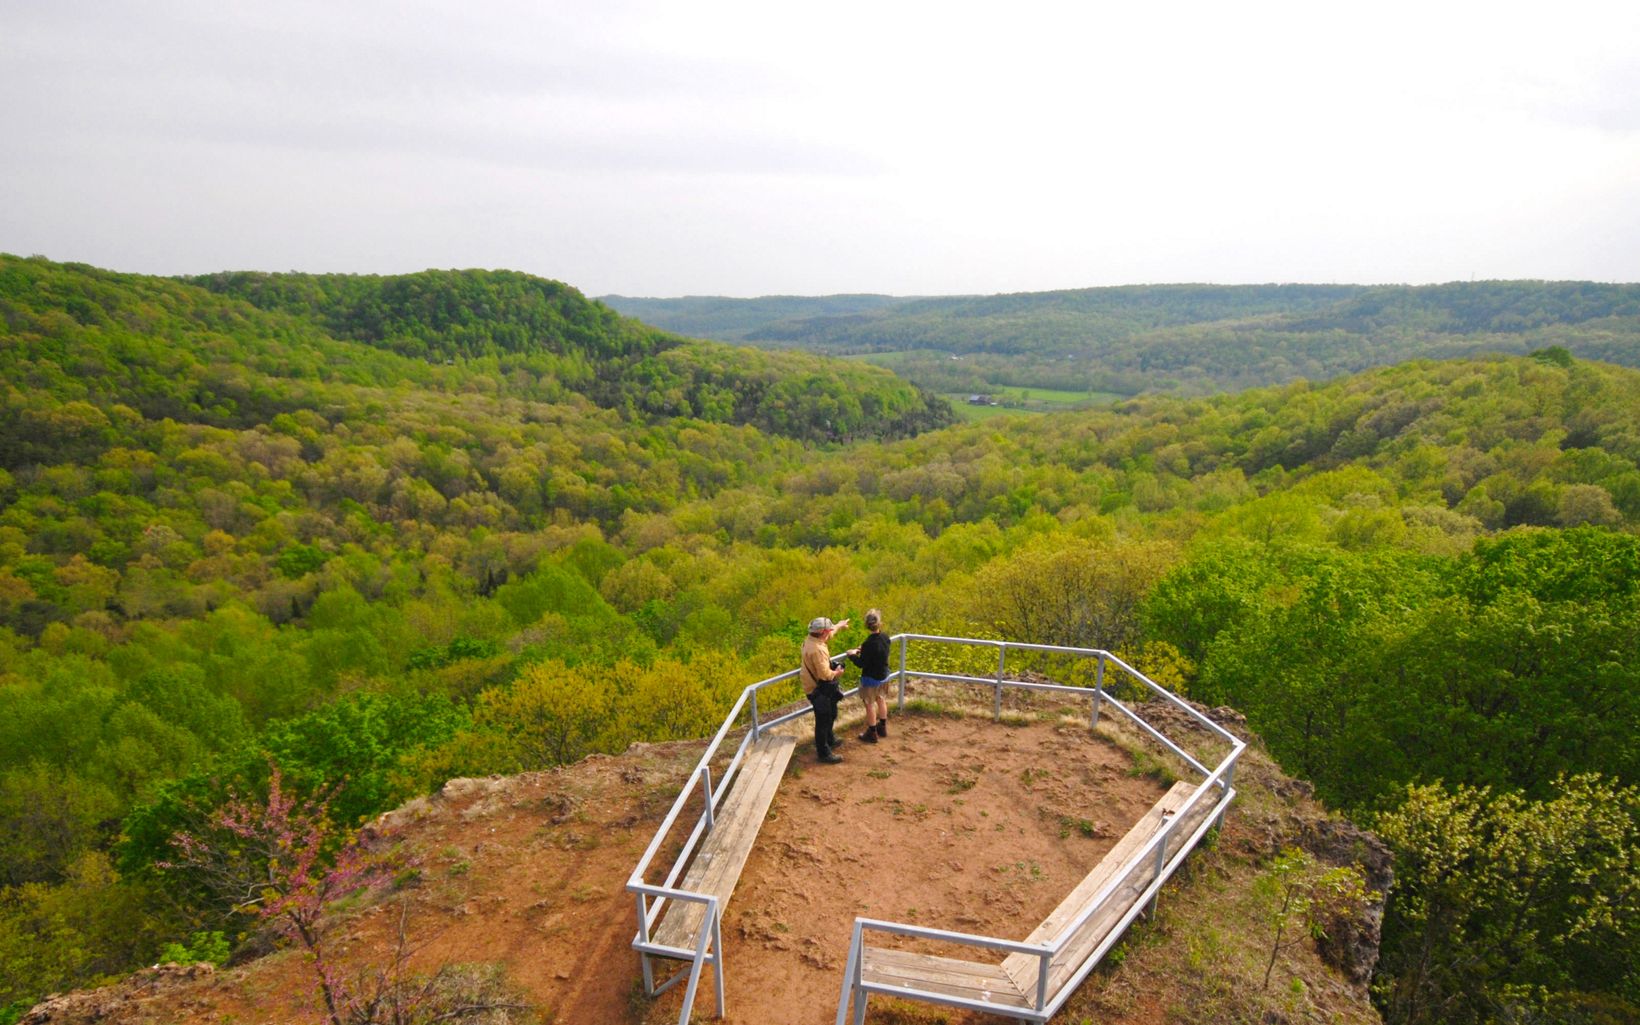 A drone camera view of the overlook at Buzzardroost Rock at the Edge of Appalachia Preserve System.